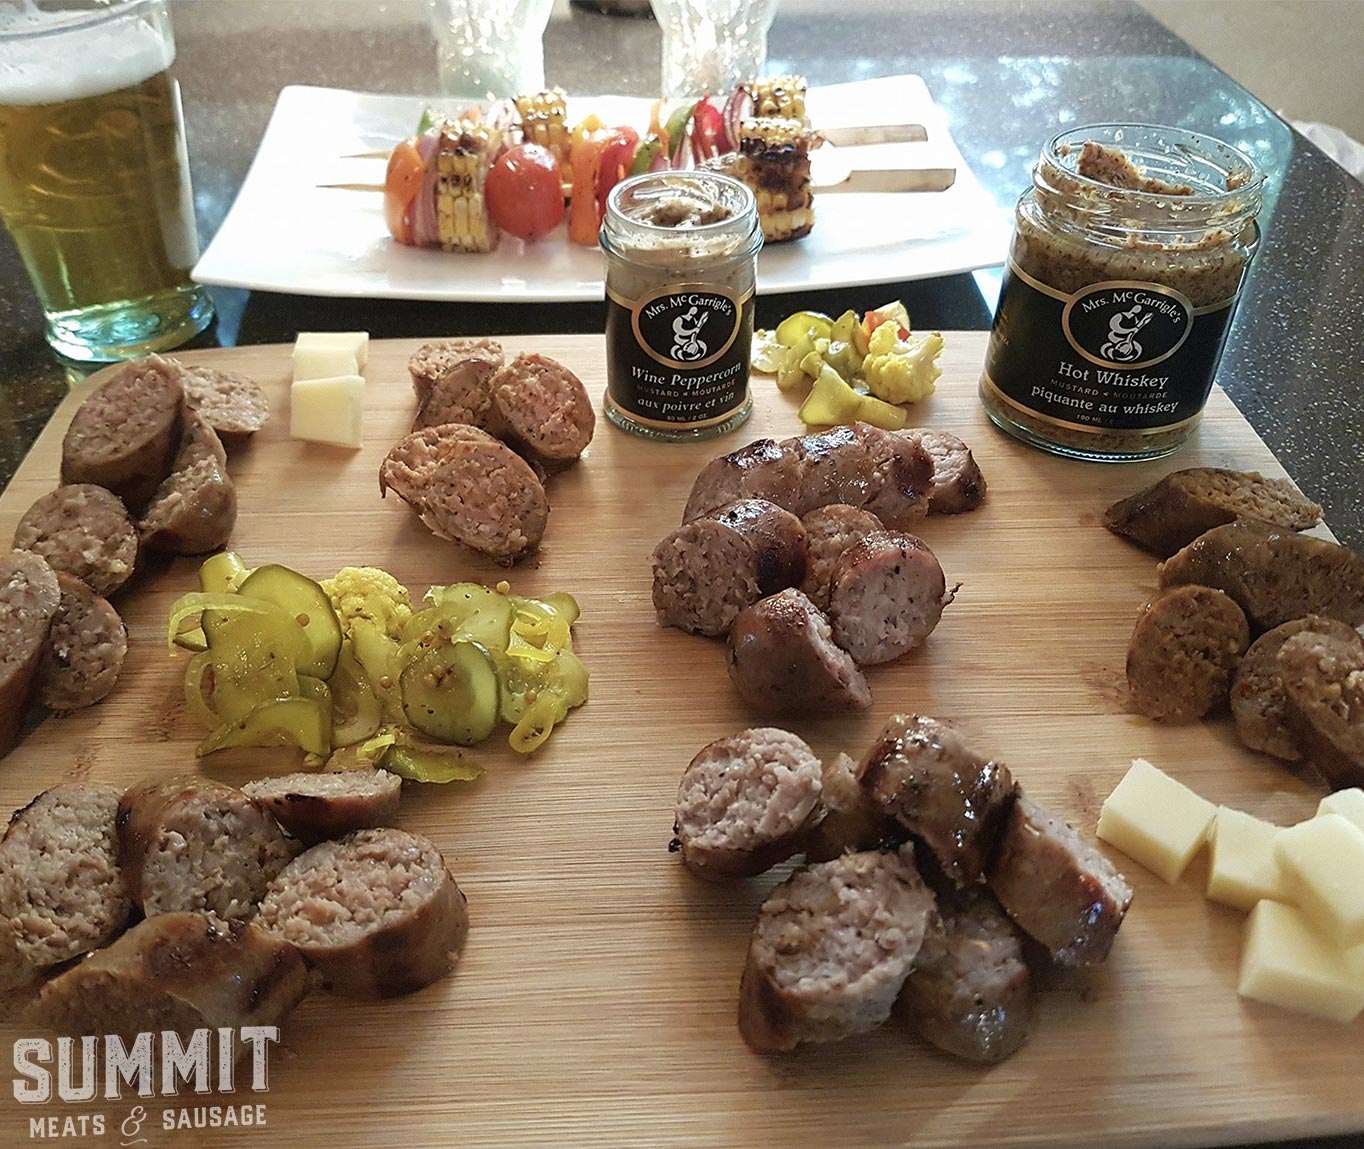 Photo of a charcuterie board with a variety of sausages from Summit Meats in Saskatoon